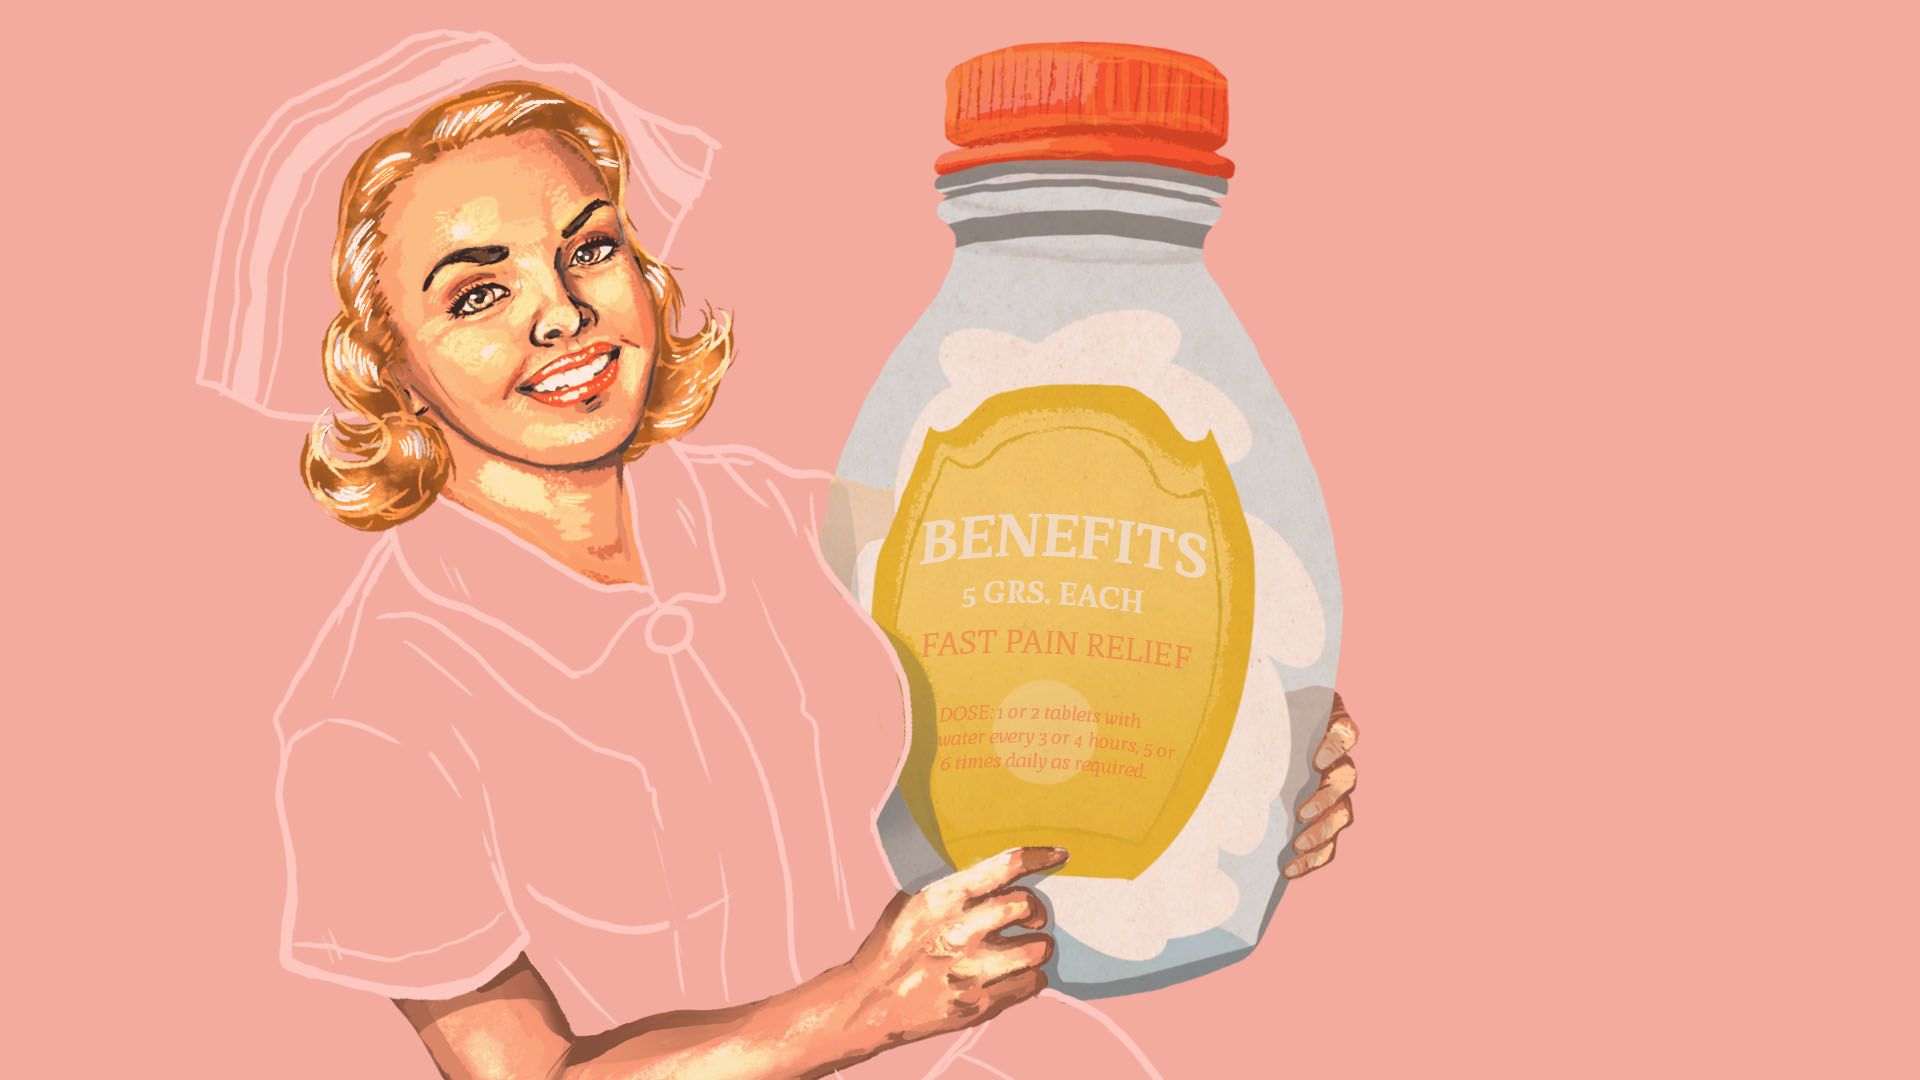 Illustration of a nurse holding a giant bottle of pills that reads "benefits"